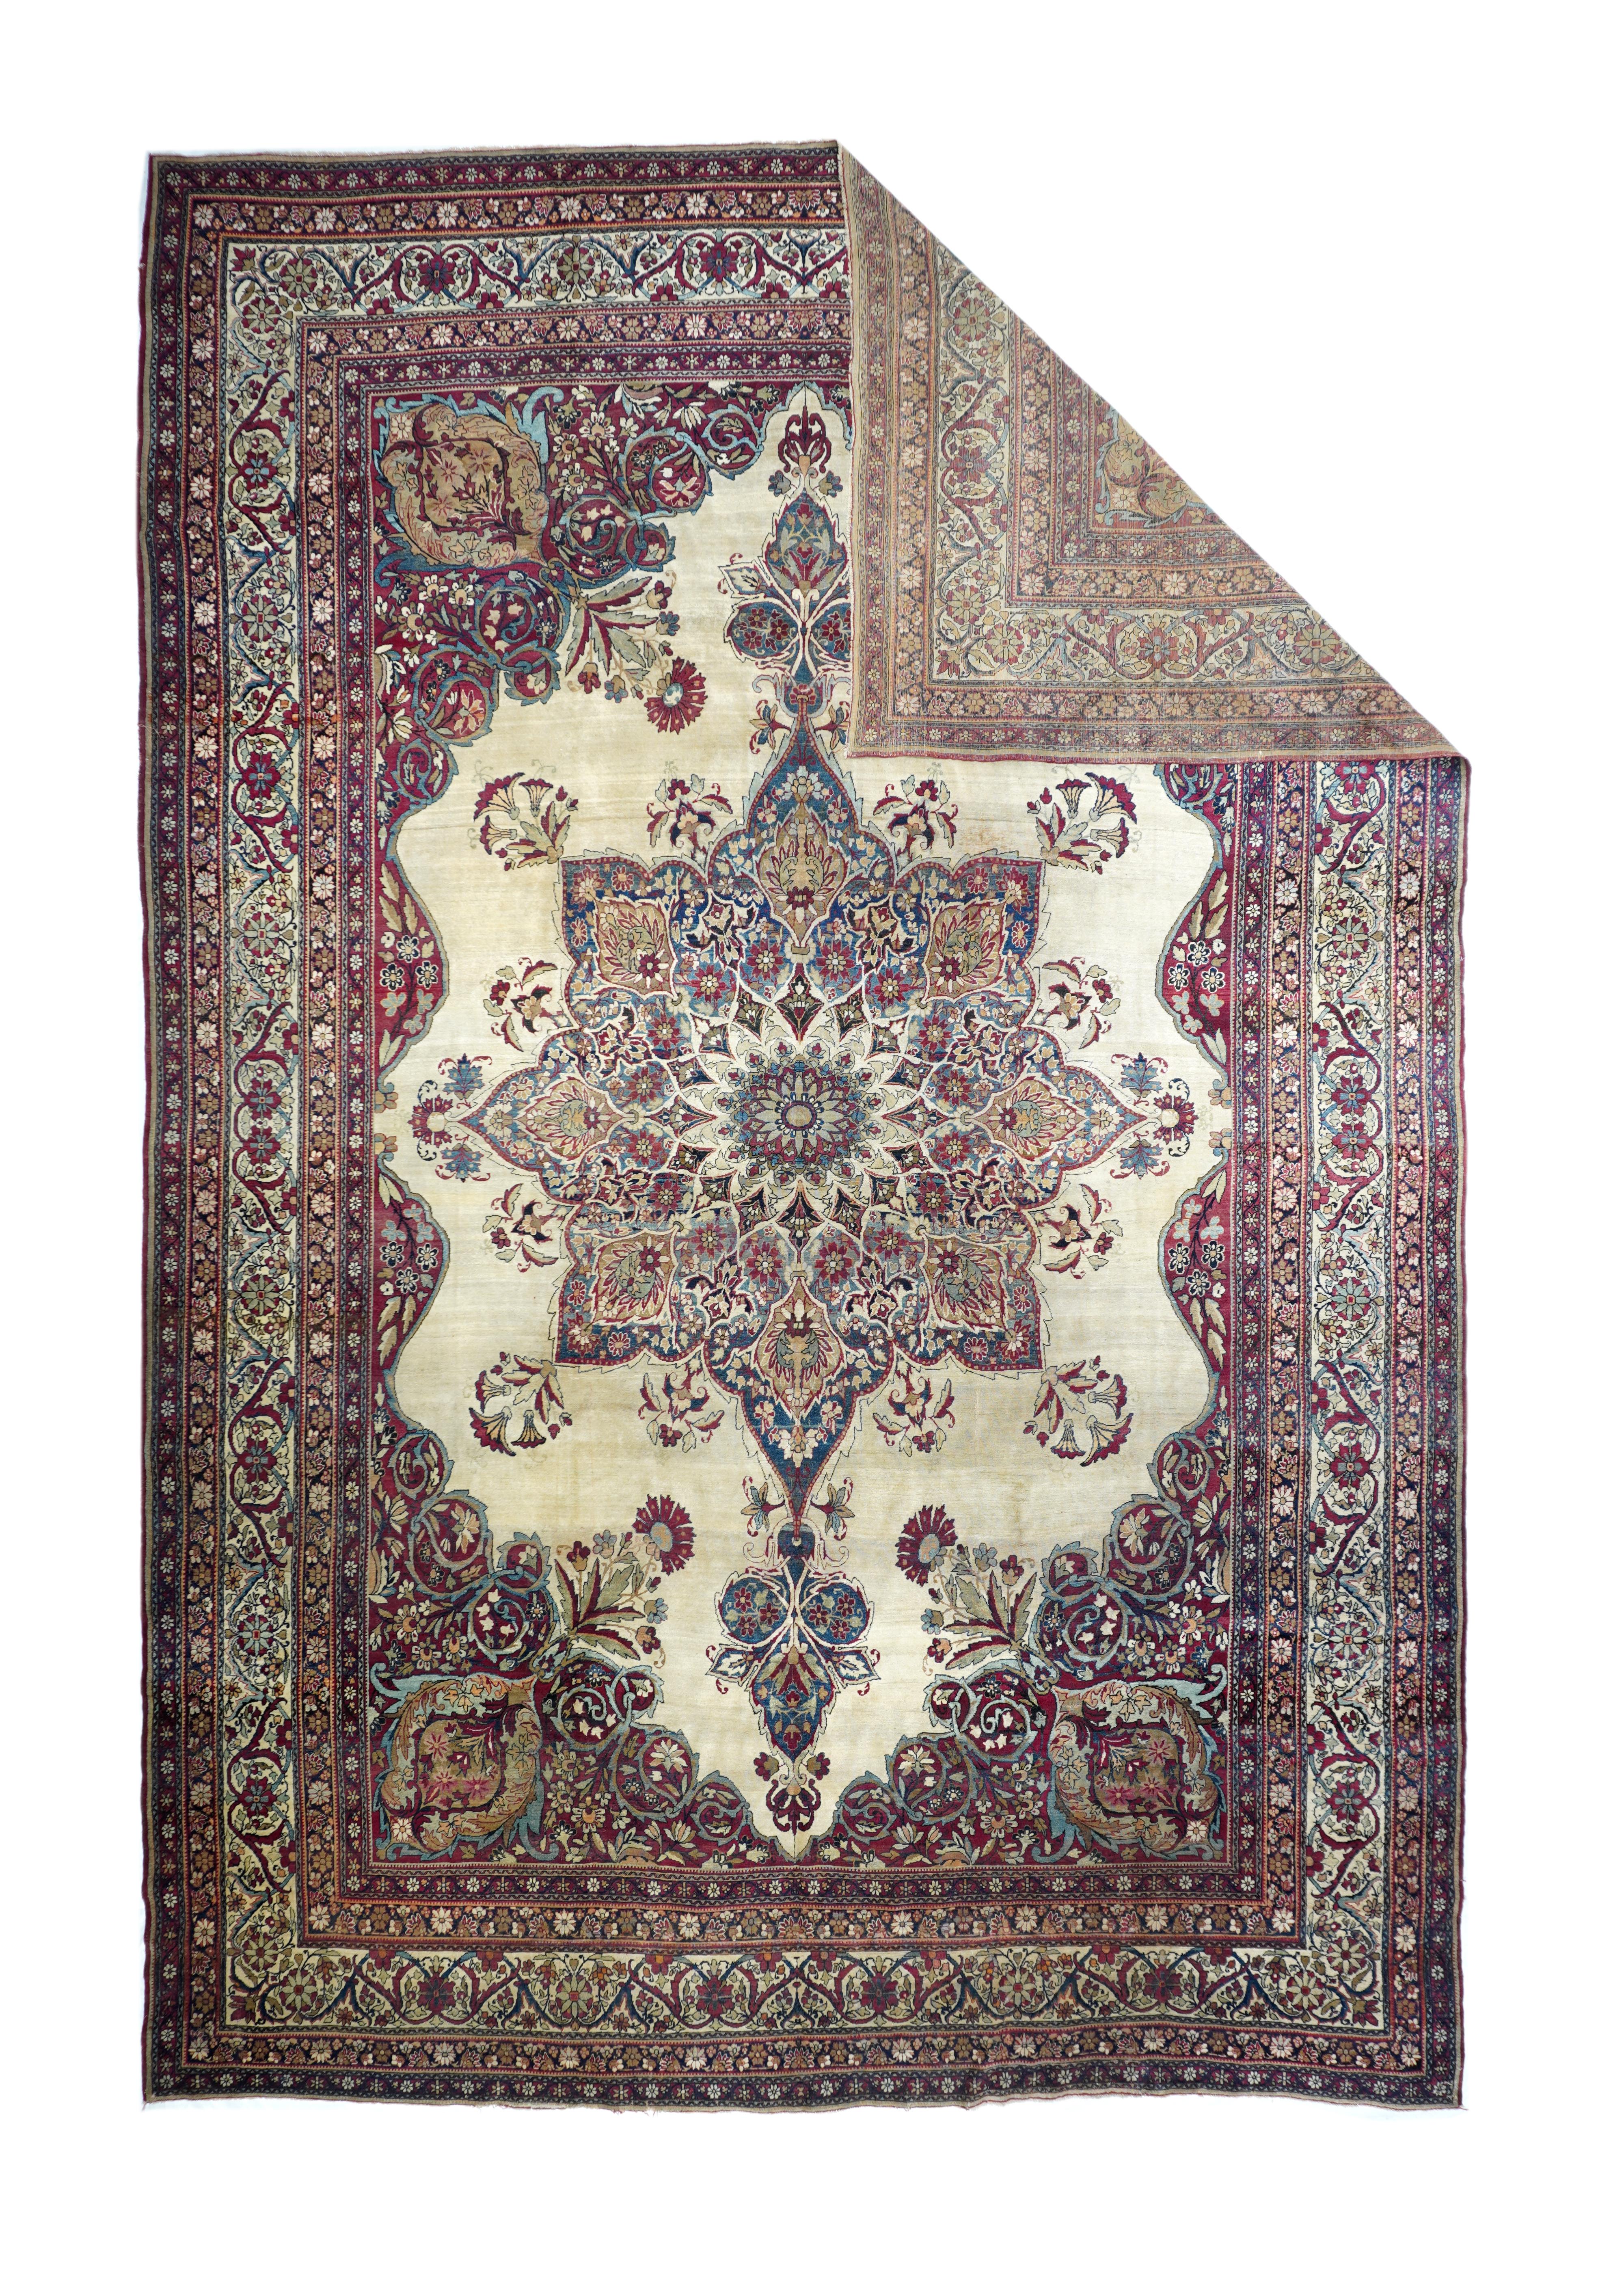 This finely woven SE Persian city carpet shows a shaped and indented ecxru-beige semi-open field centred by an octogramme filigree medallion with eight floral pendants and a 16 point sub-medallion. Cochineal read volute corners with emerging